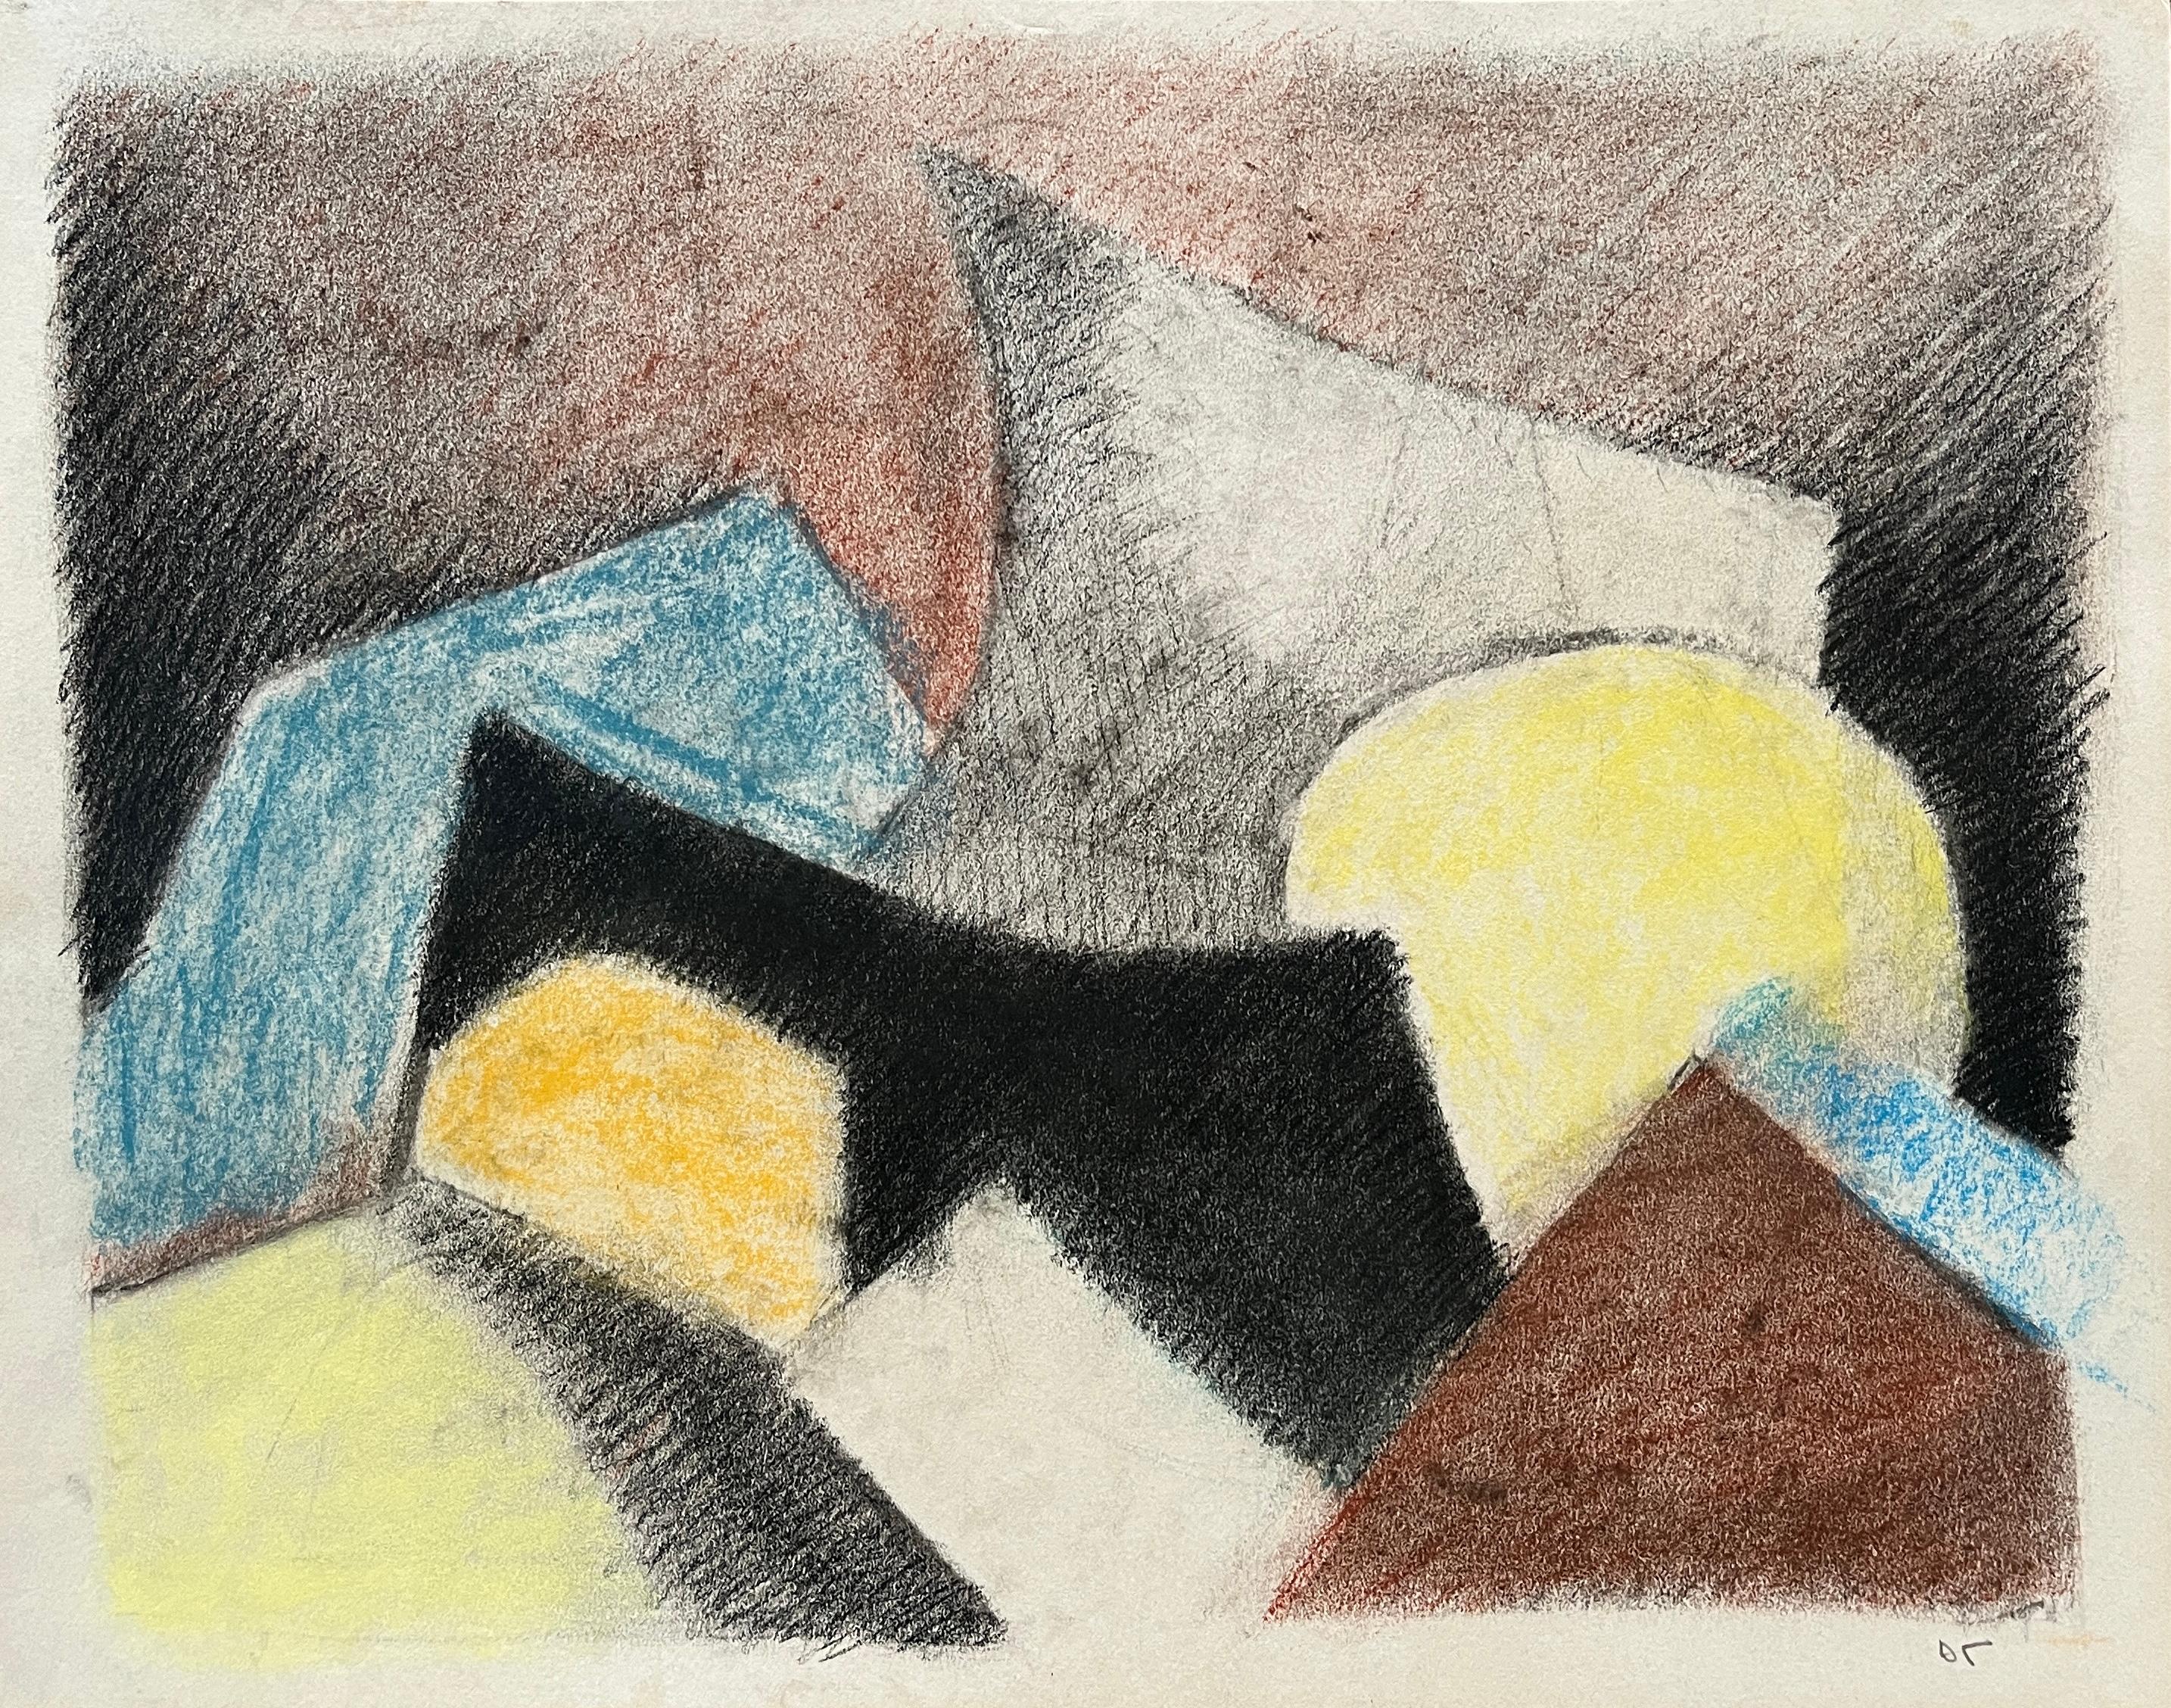 1980's Cubist "Yellow, Blue, Black" Soft Pastel Abstract Drawing - Mixed Media Art by D. Tongen